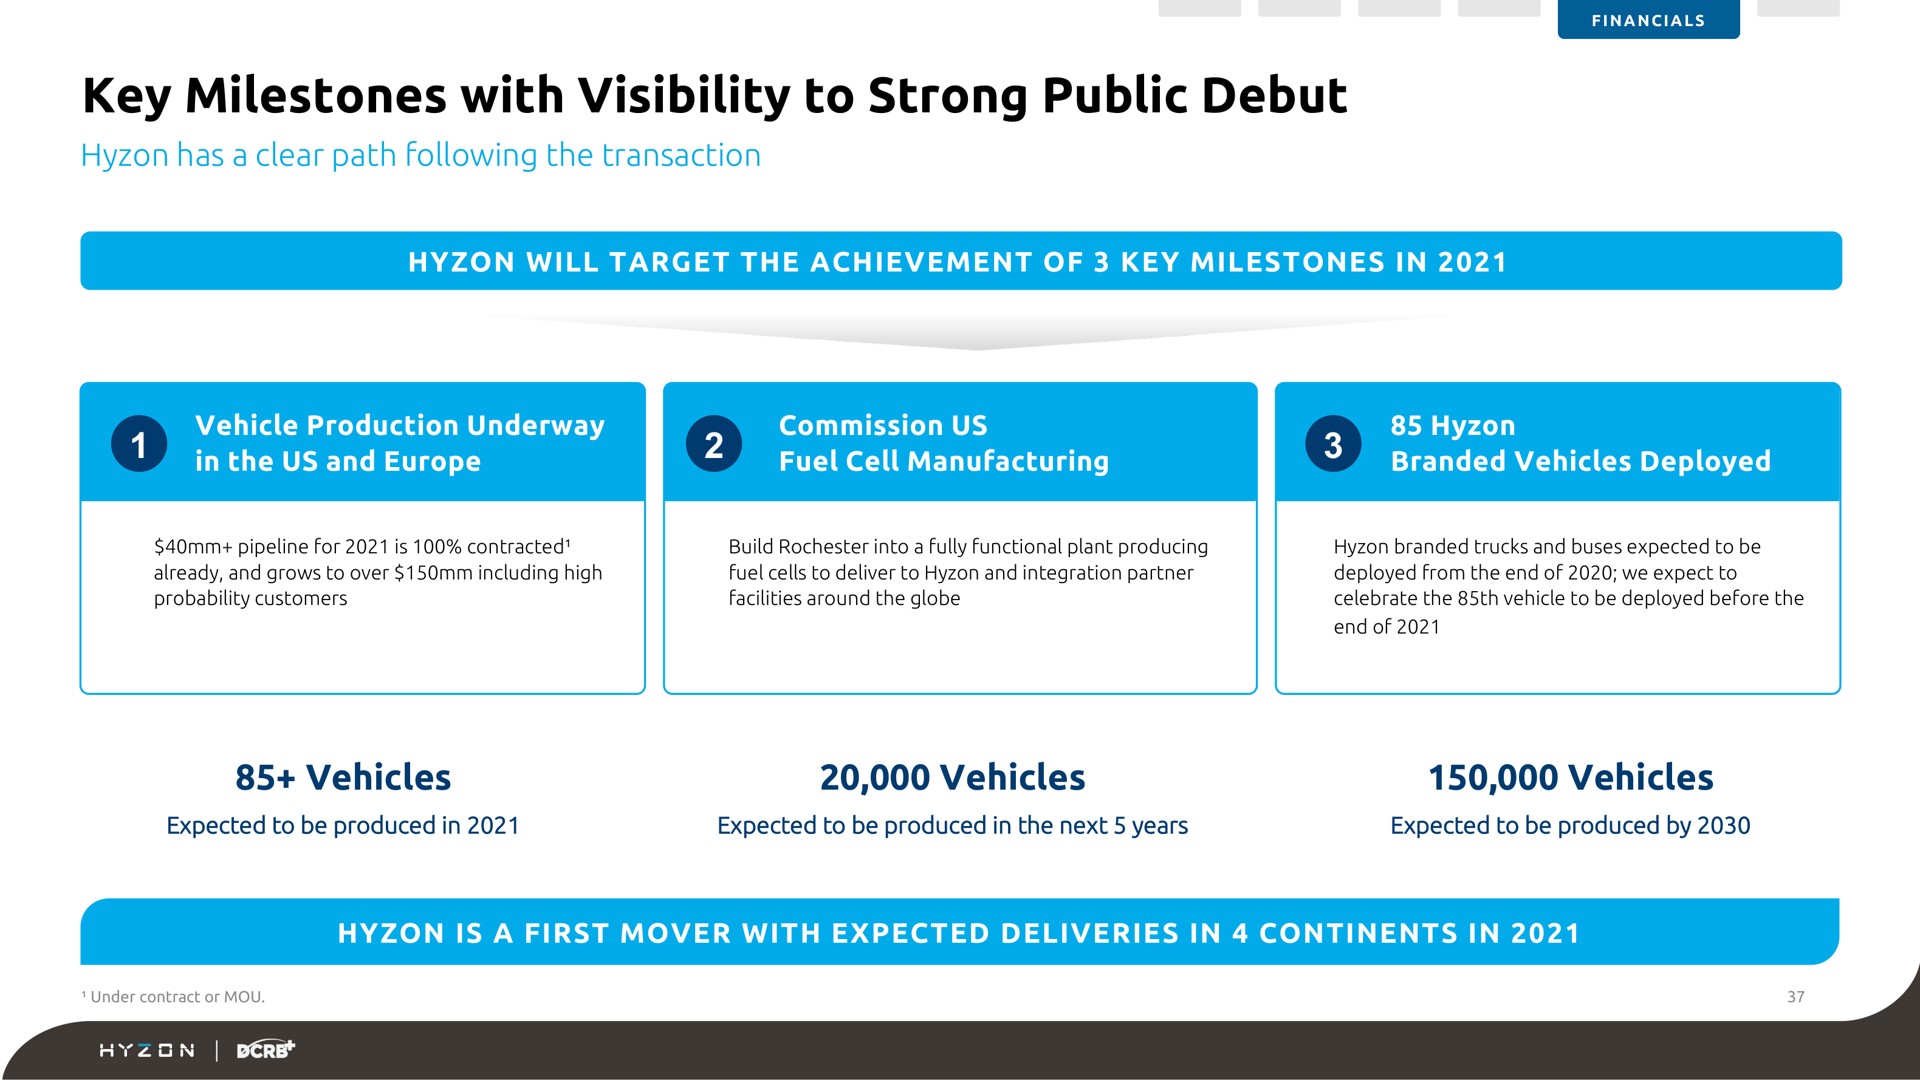 key milestones with visibility to strong public debut | Hyzon